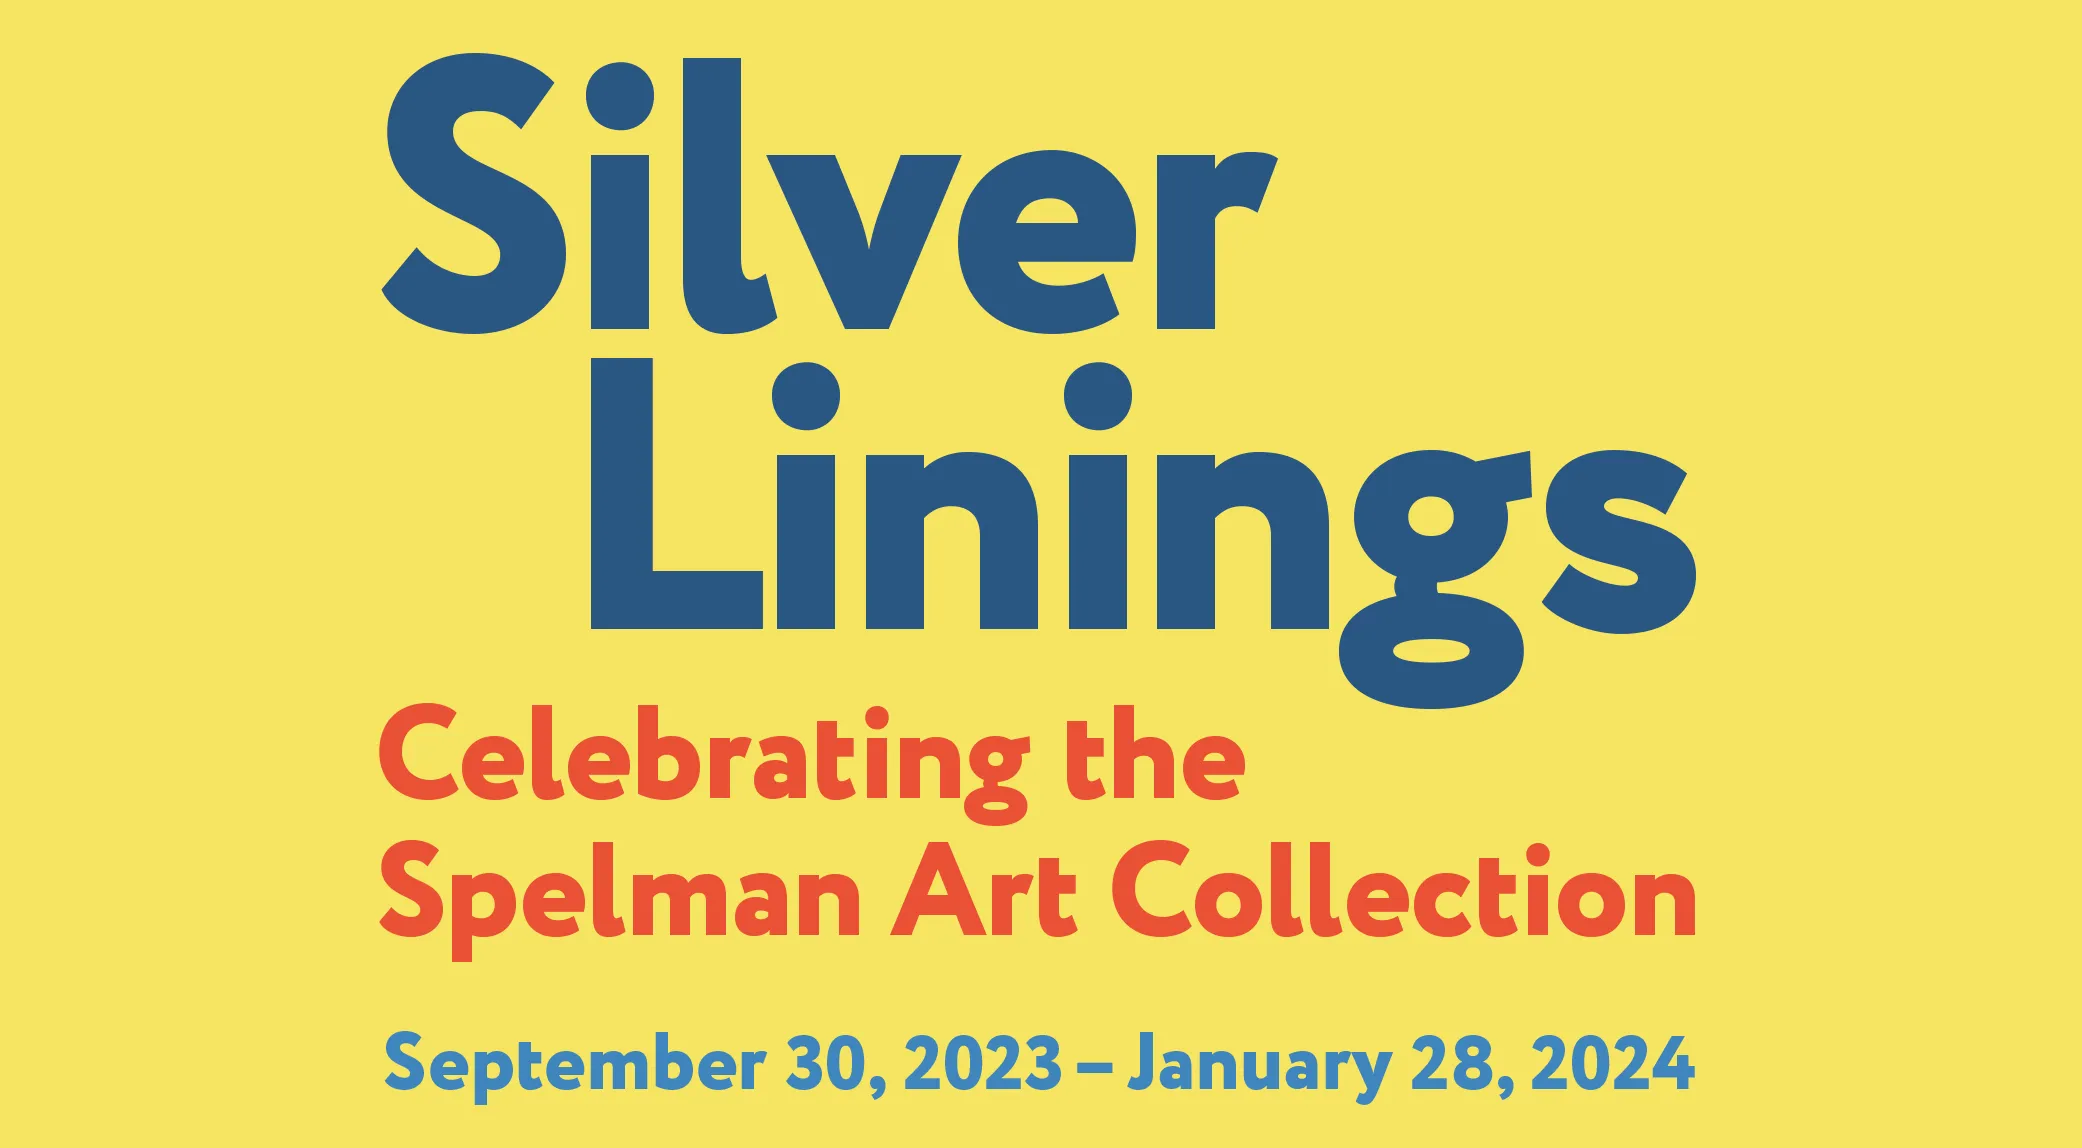 Silver Linings Celebrating the Spelman Art Collection September 30, 2023 through January 28, 2024